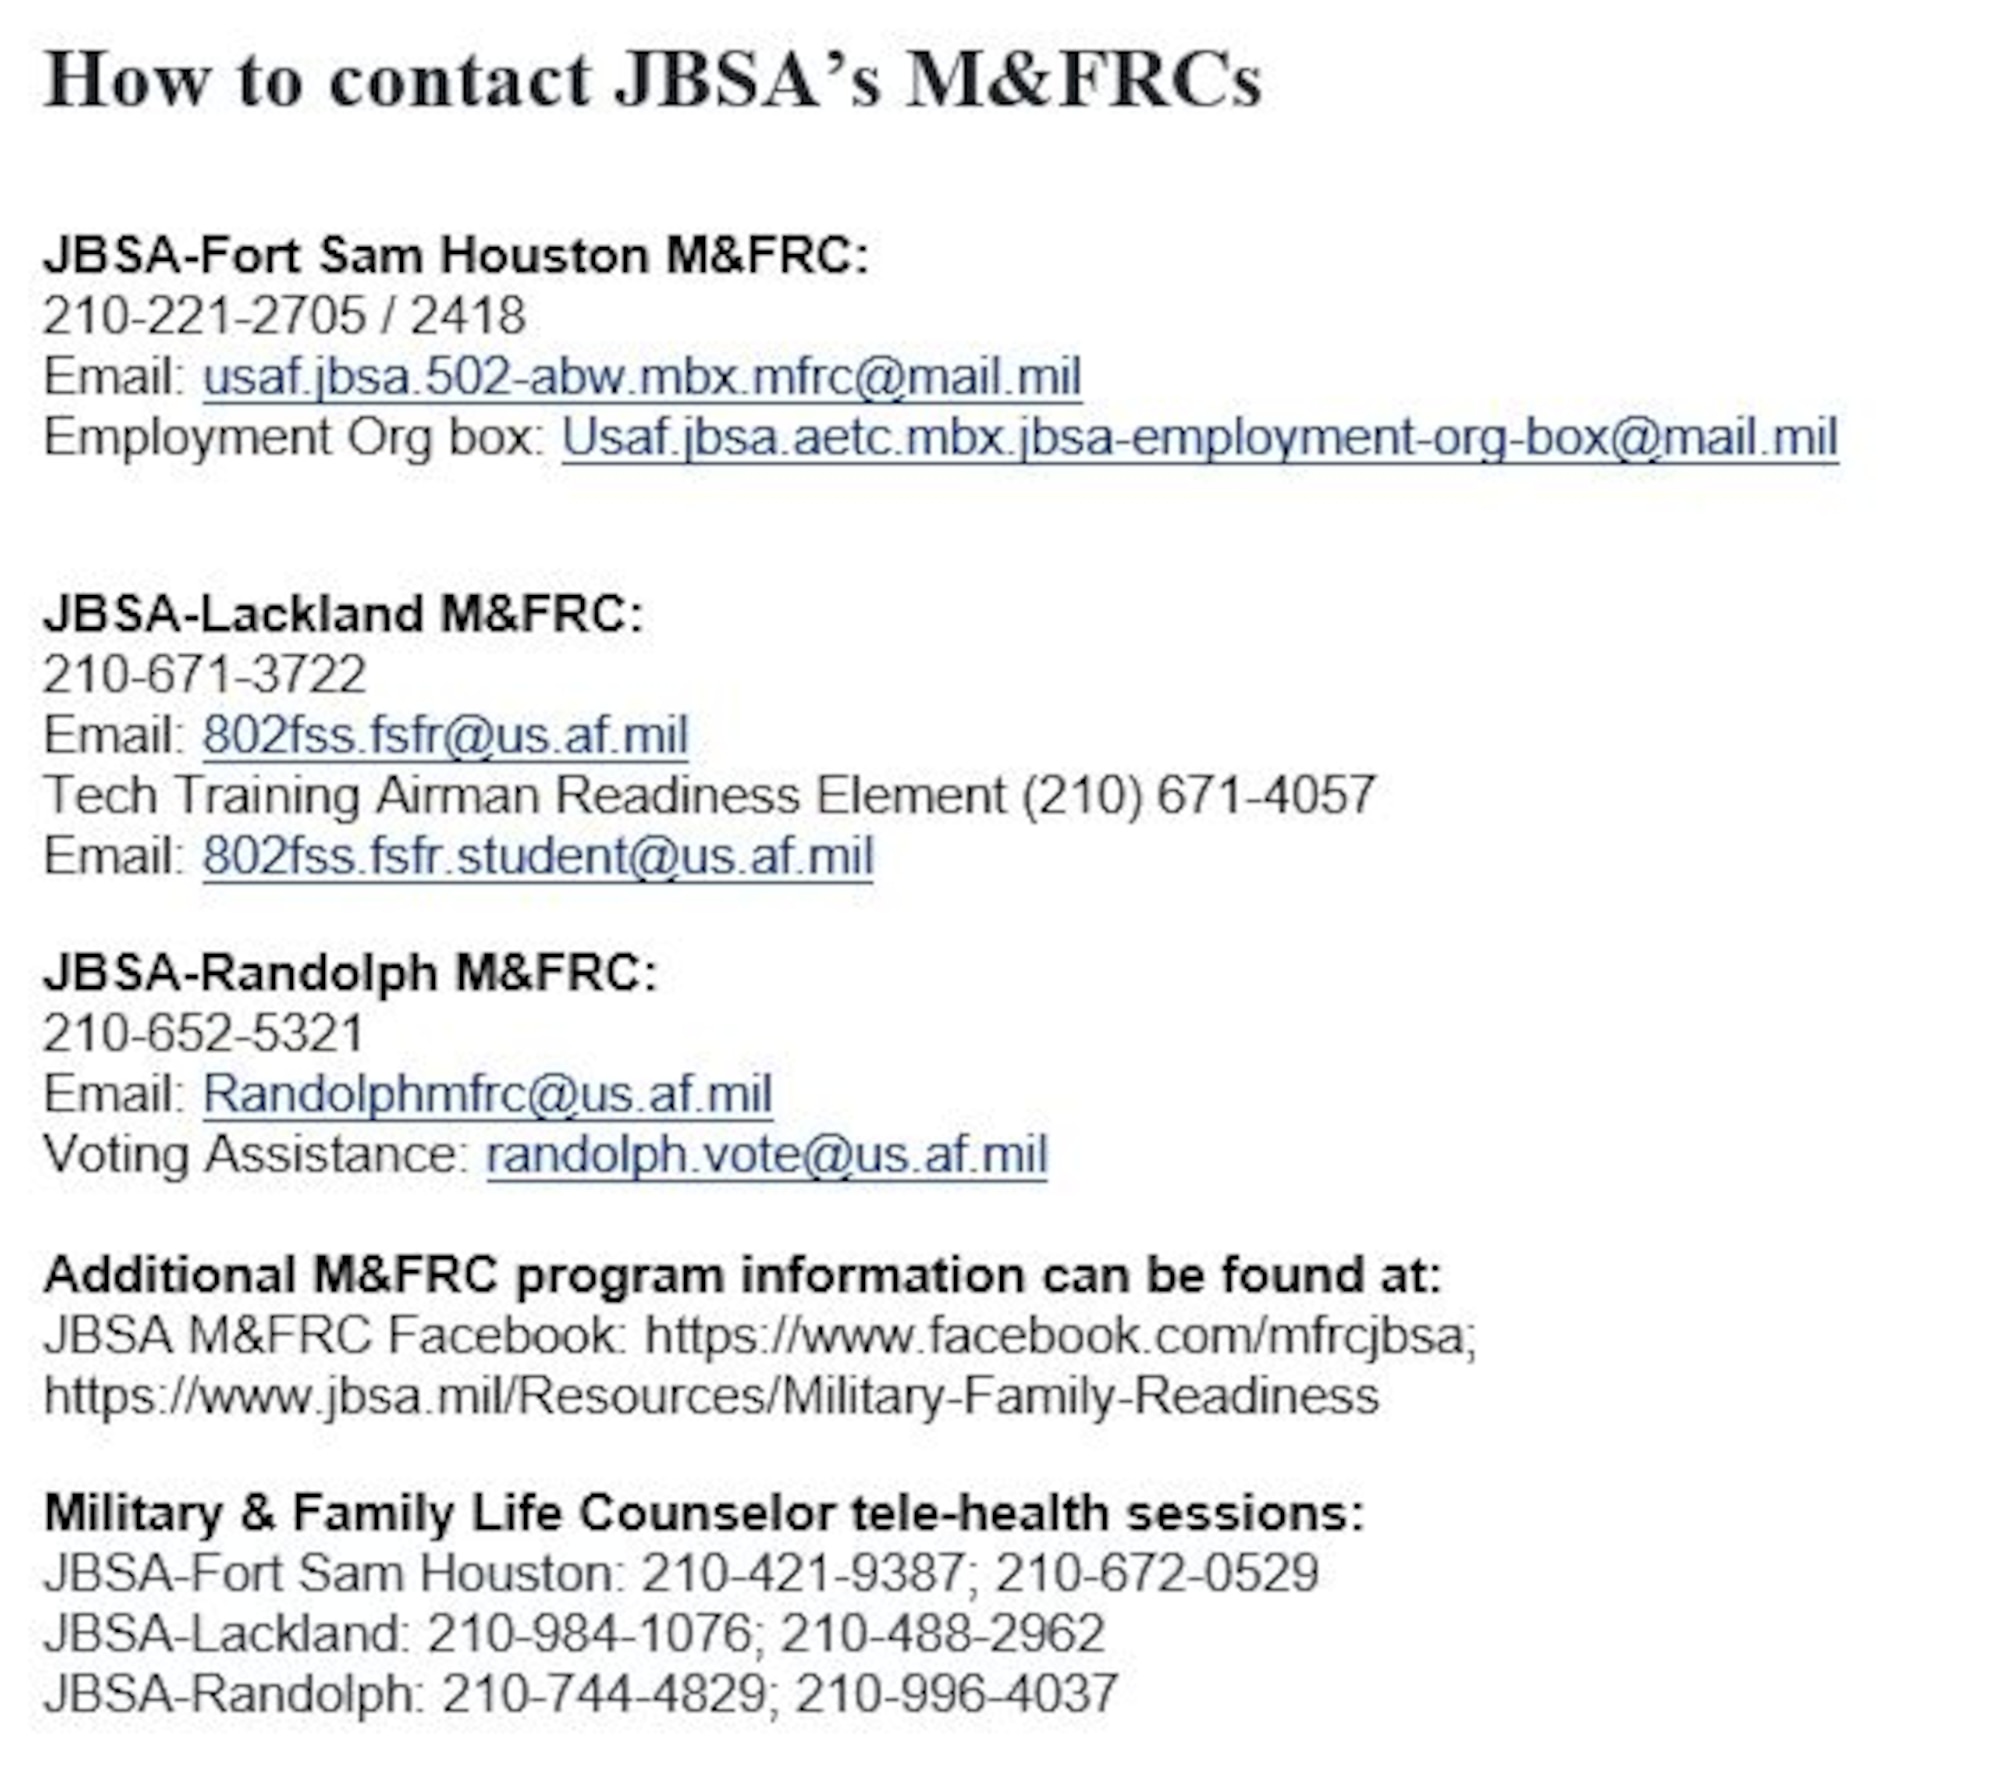 Contact information for JBSA Military Family Readiness Centers